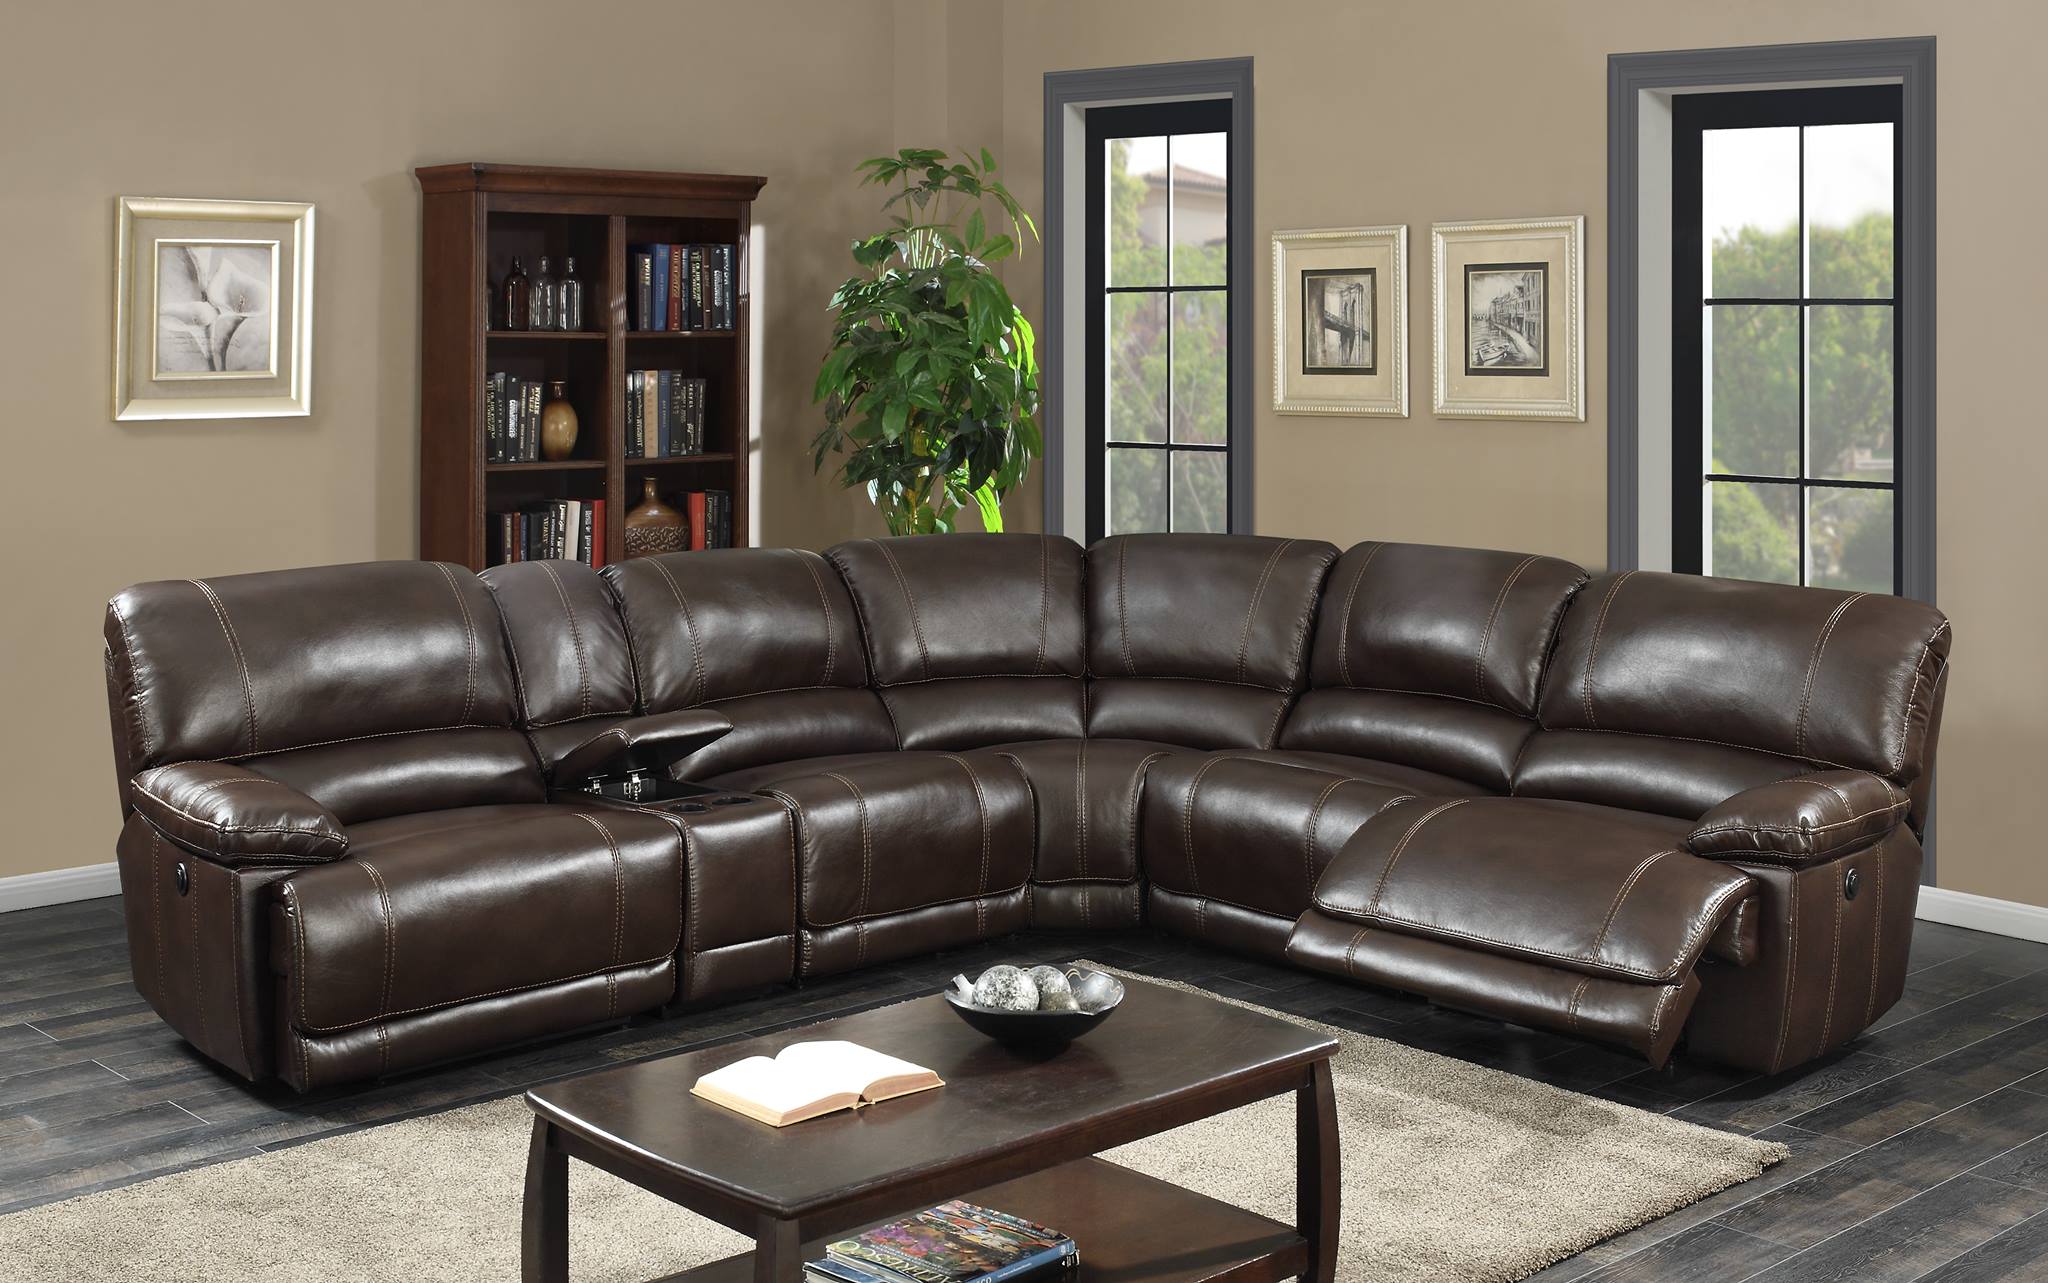 Venice Leather Gel Reclining Sectional, Danvors 7 Pc Leather Sectional Sofa